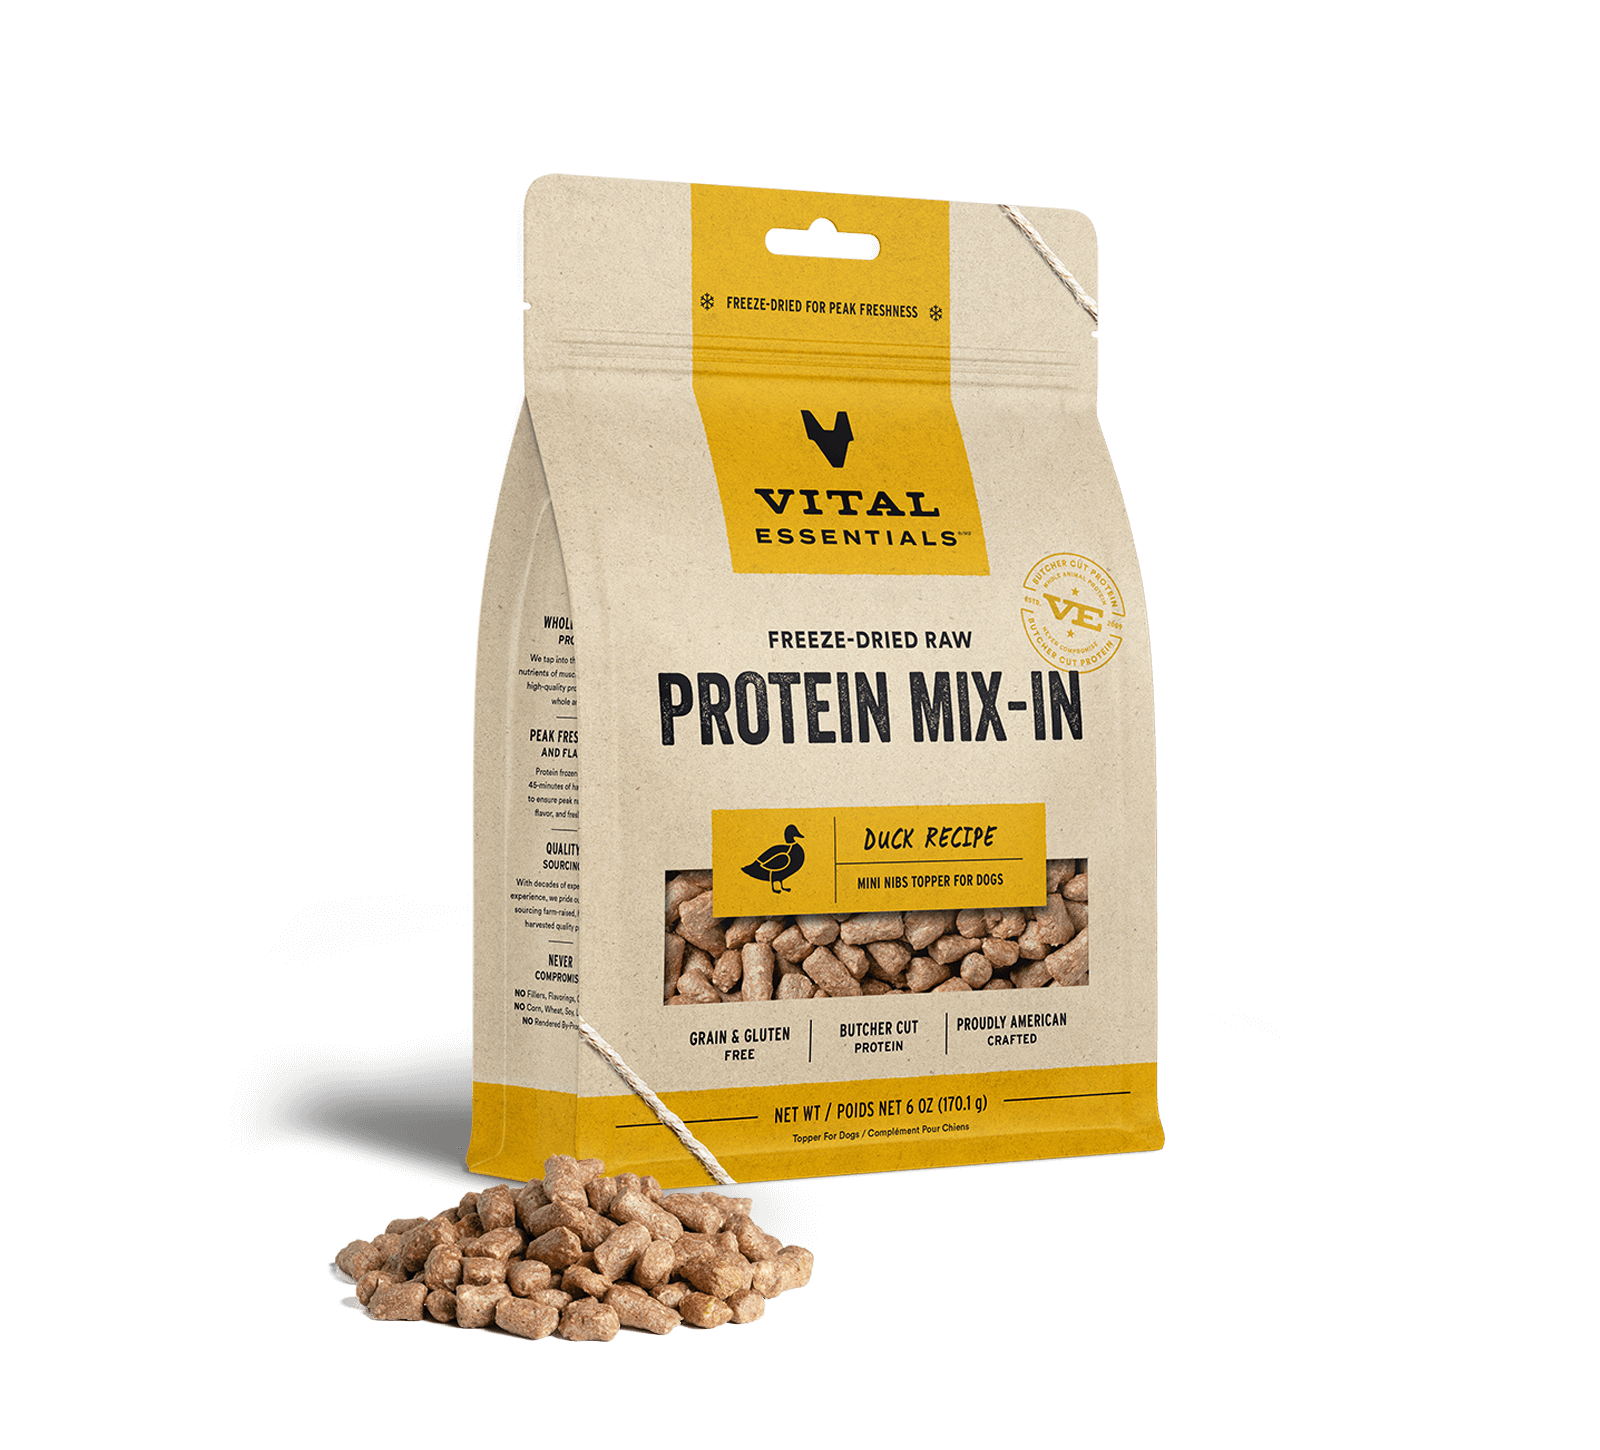 Vital Essentials Freeze-Dried Raw Protein Mix-In Duck Recipe Mini Nibs Topper for Dogs, 6 oz - Items on Sale Now